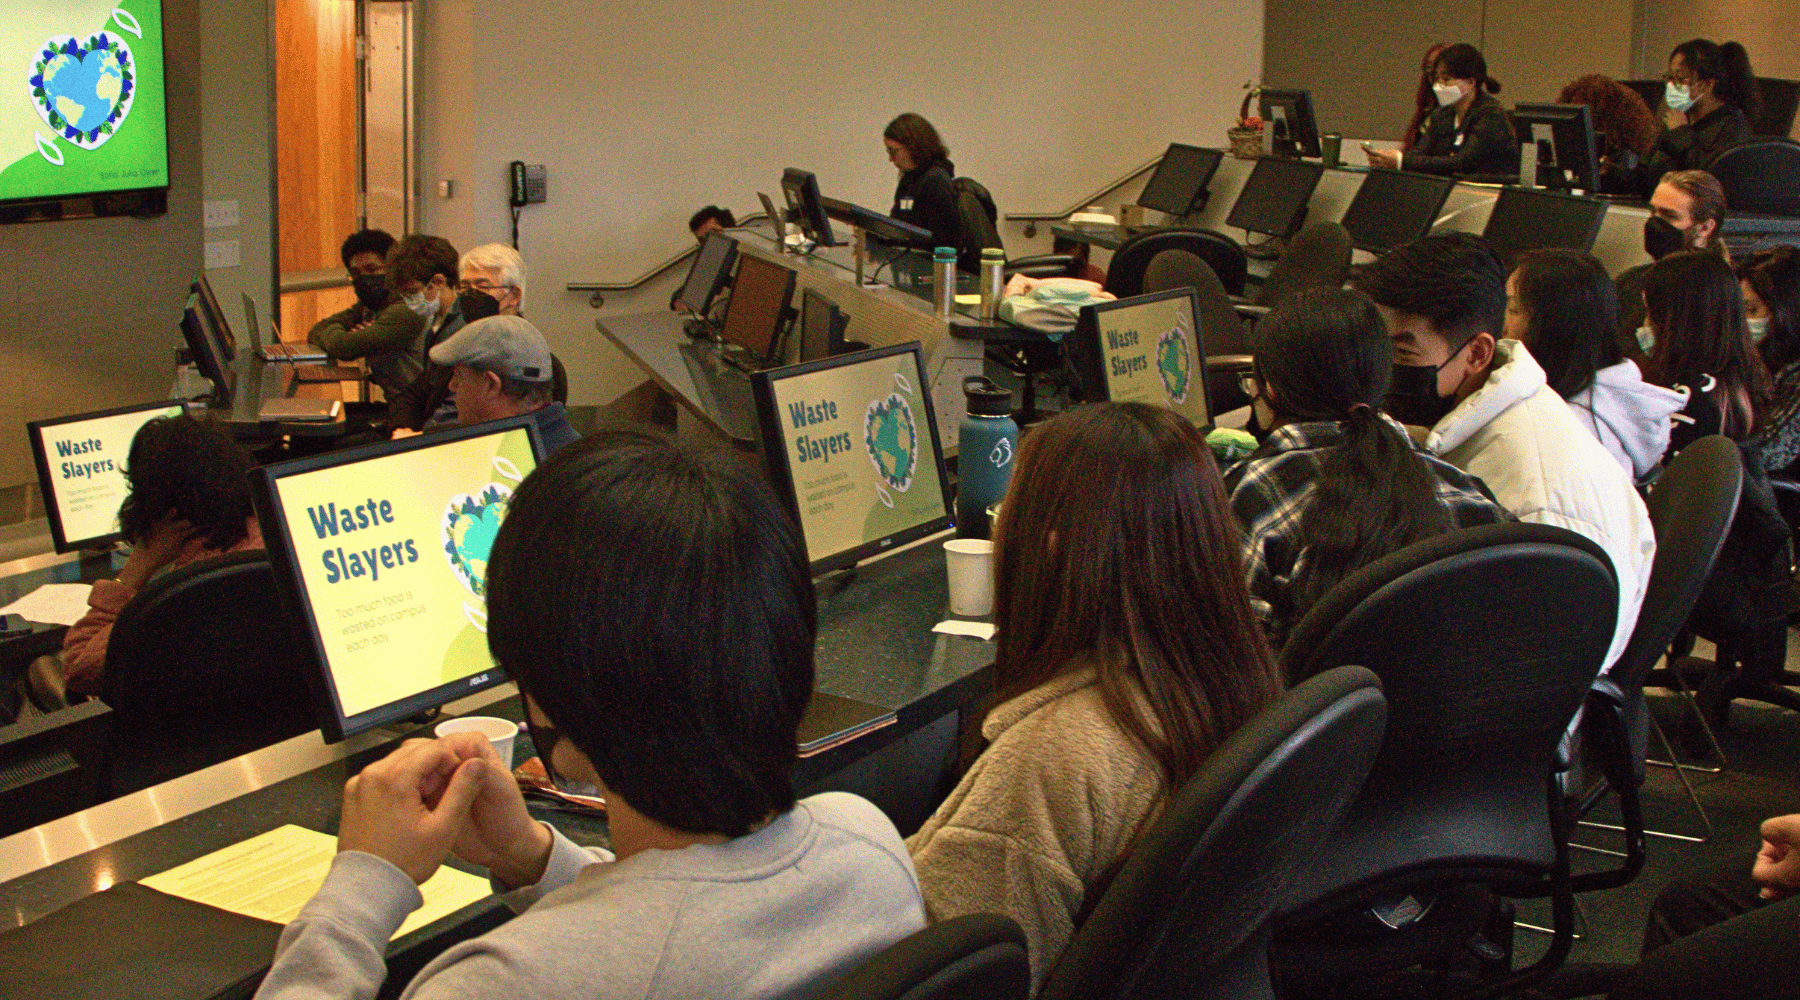 Students in auditorium looking at a presentation.